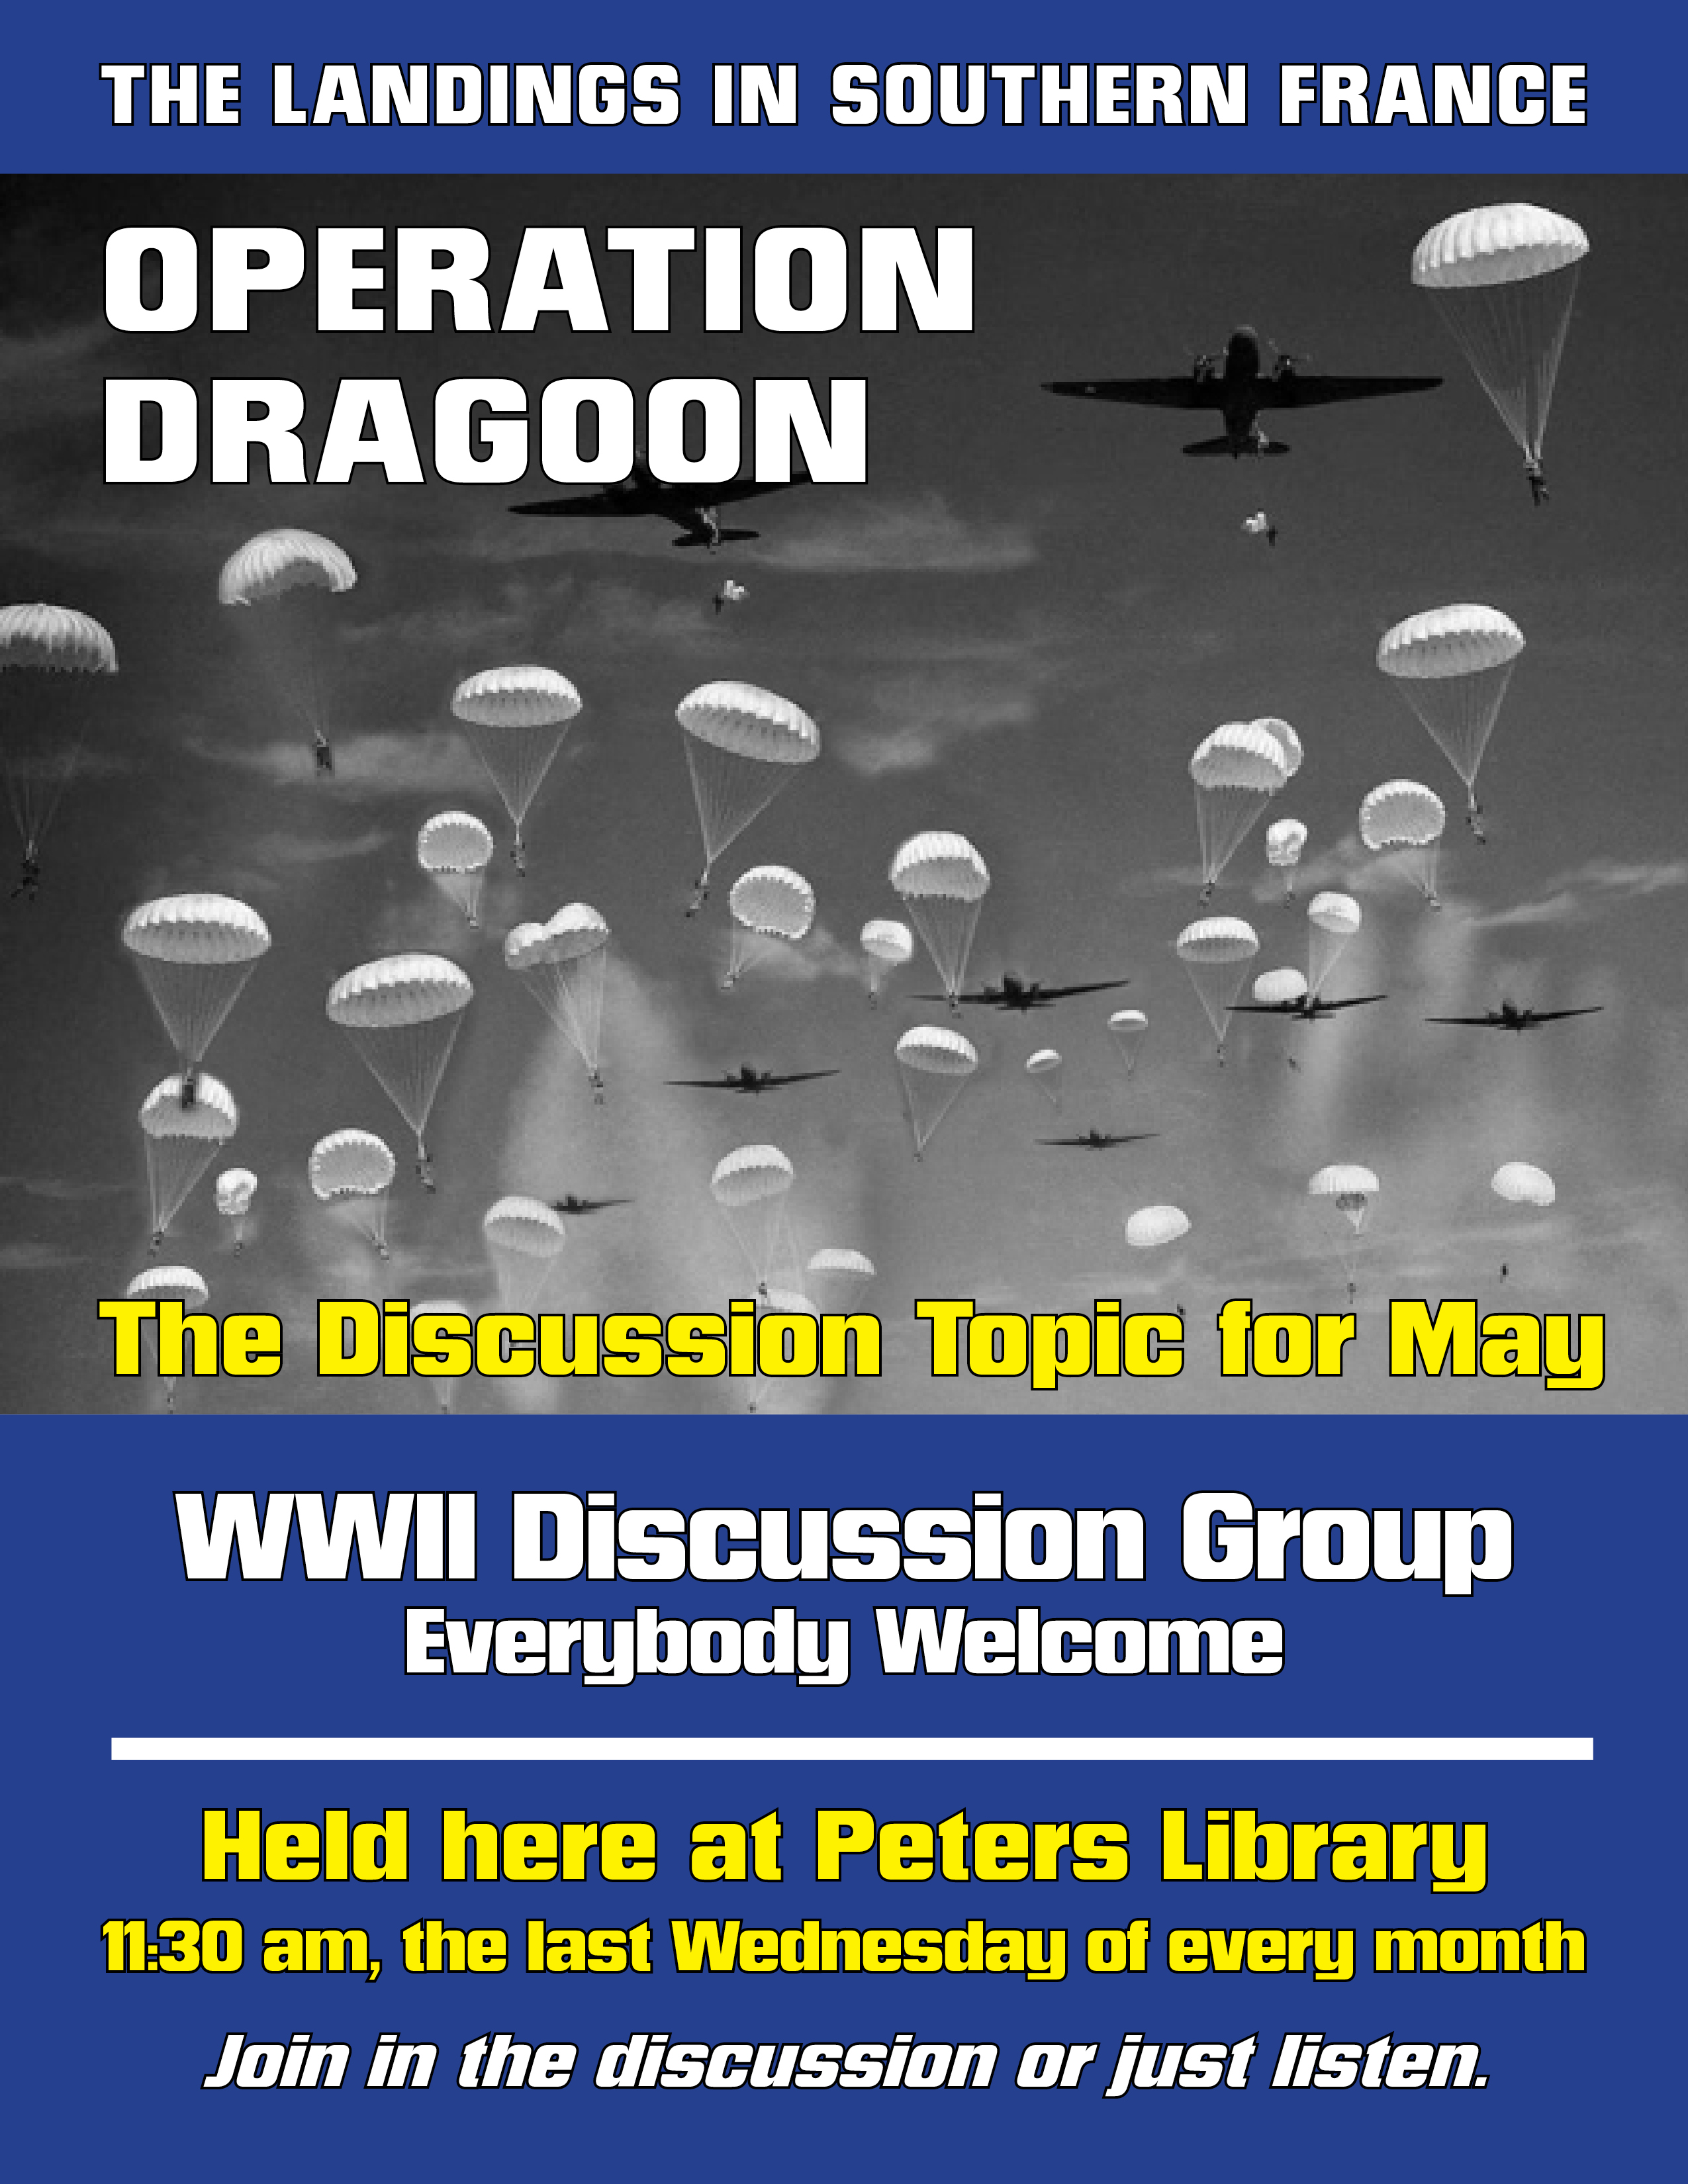 The landings in southern france, operation dragon. WWII discussion group 11:30 am last Wednesday of the month at PTPL